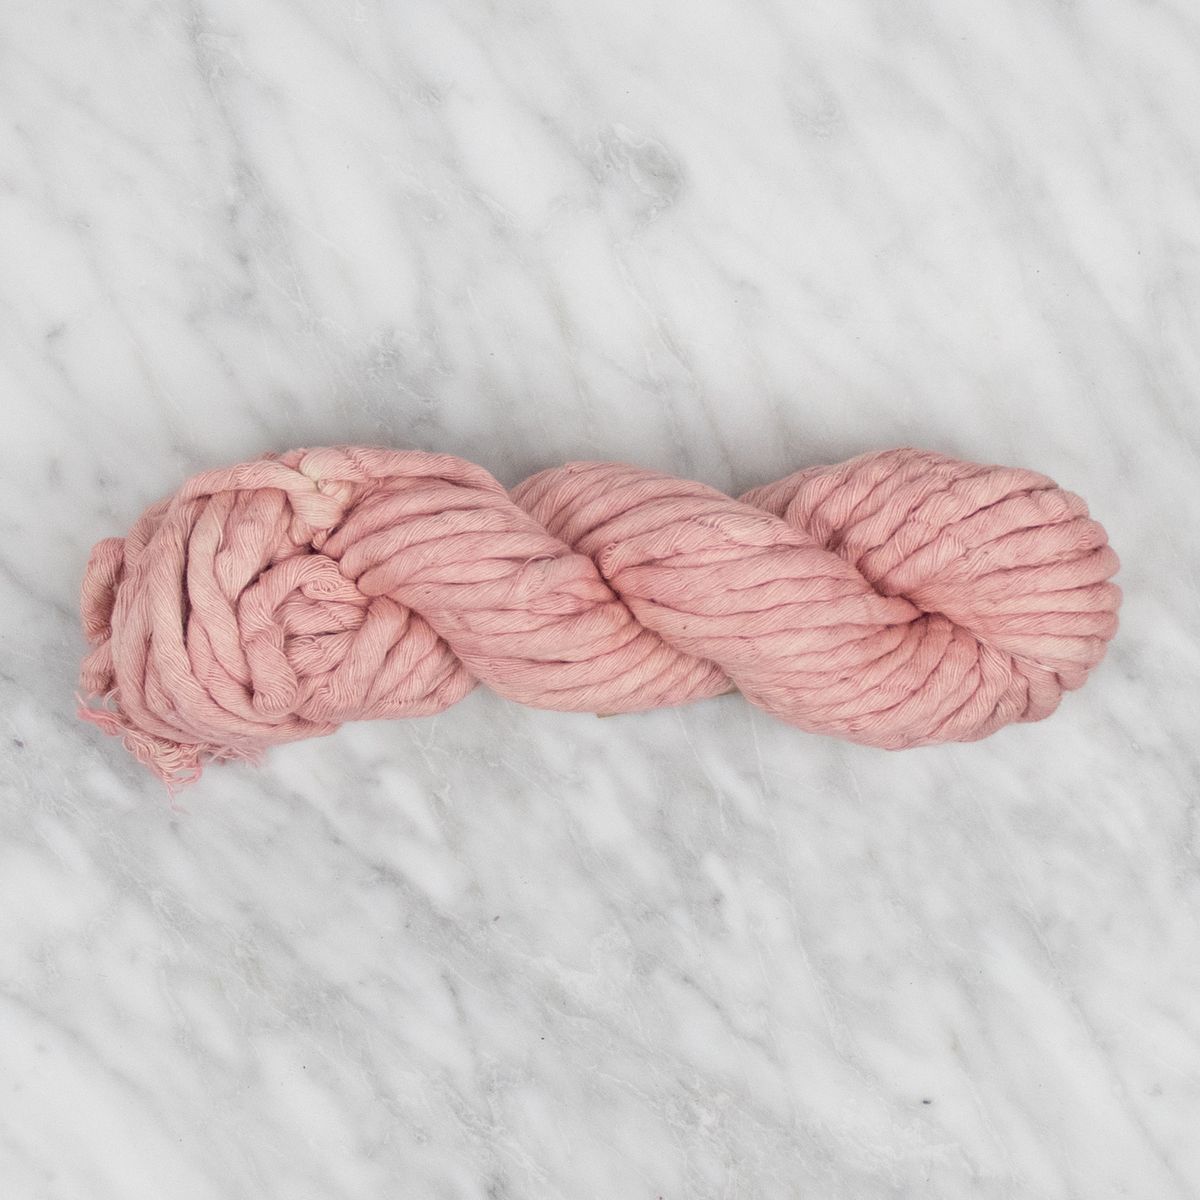 5mm Hand-Dyed Cotton String - Peach Blossom - 100 grams